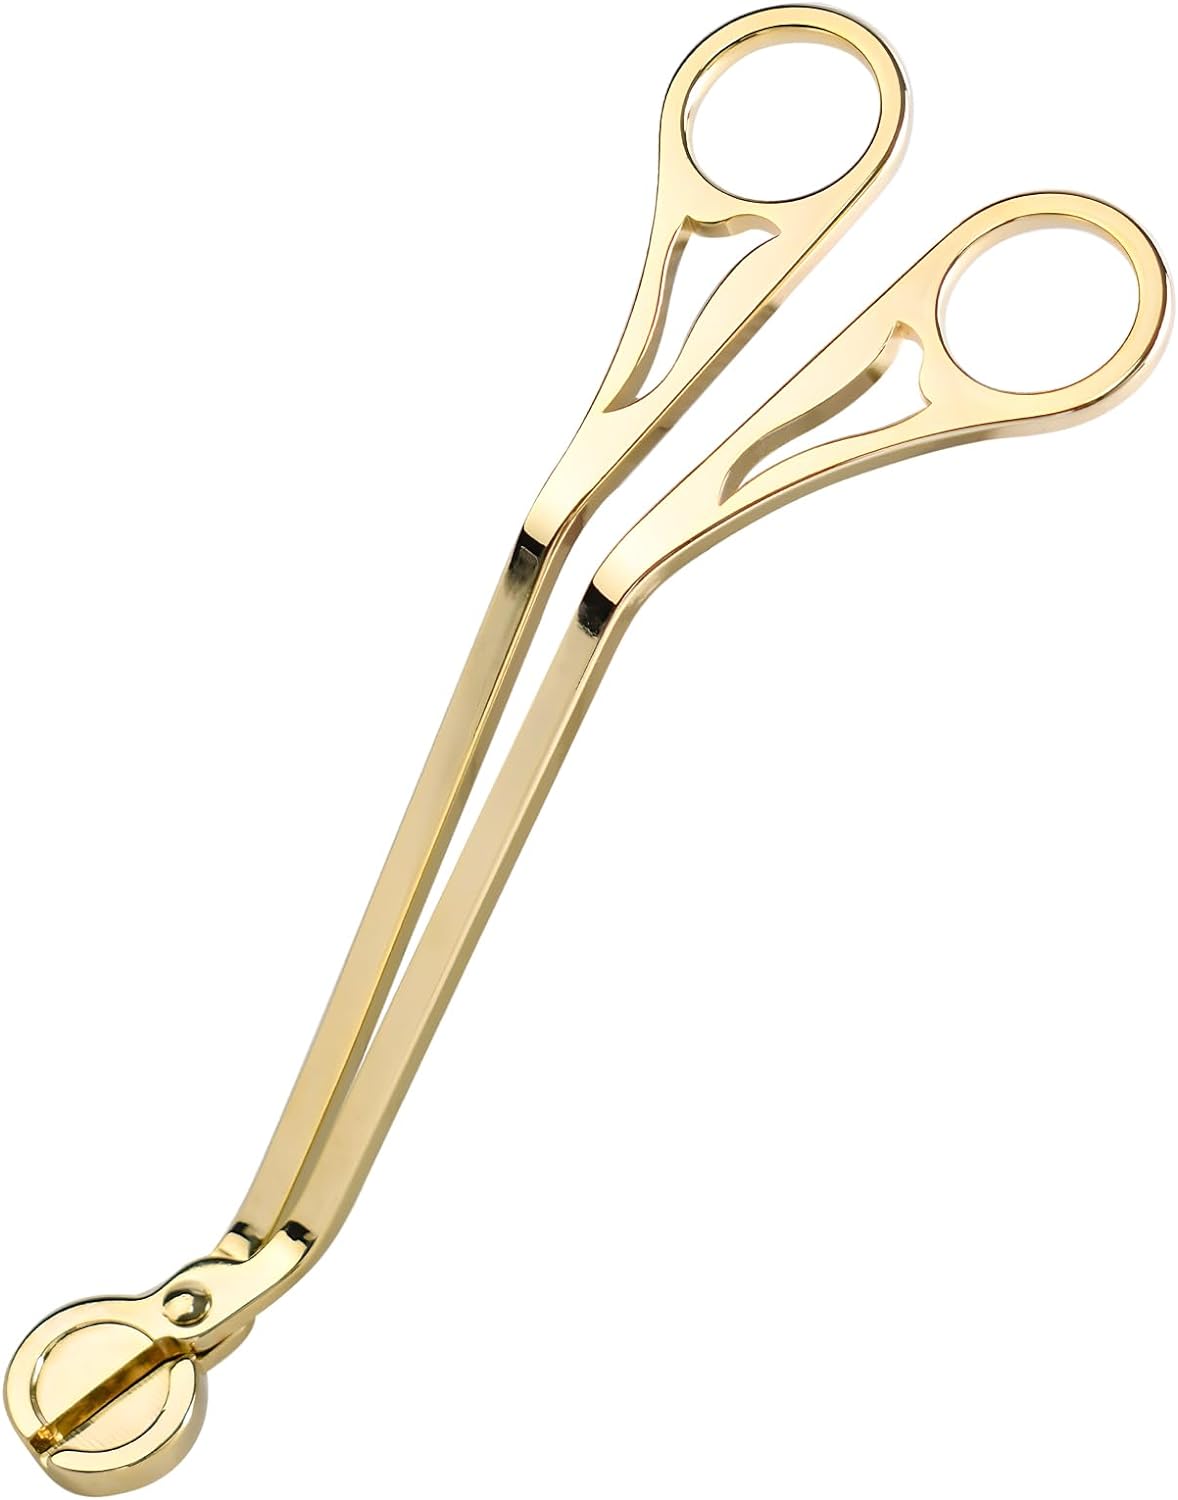 Candle Wick Cutter Trimmer Wick Clipper Wick Cutter Scissor Reaches Deep Into Candles Wick Prevent Soot Buildup Candle Accessories (Gold)